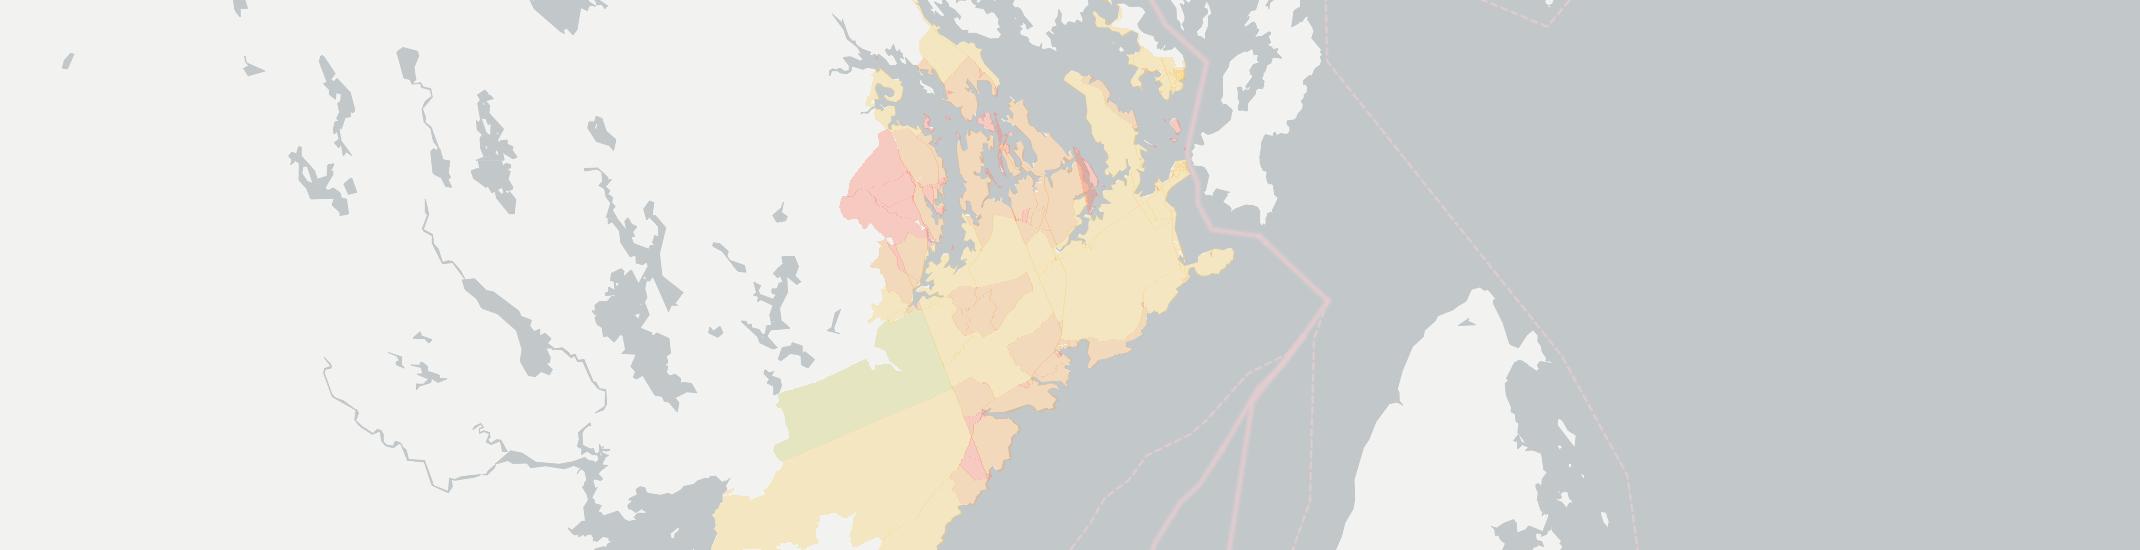 Lubec Internet Competition Map. Click for interactive map.